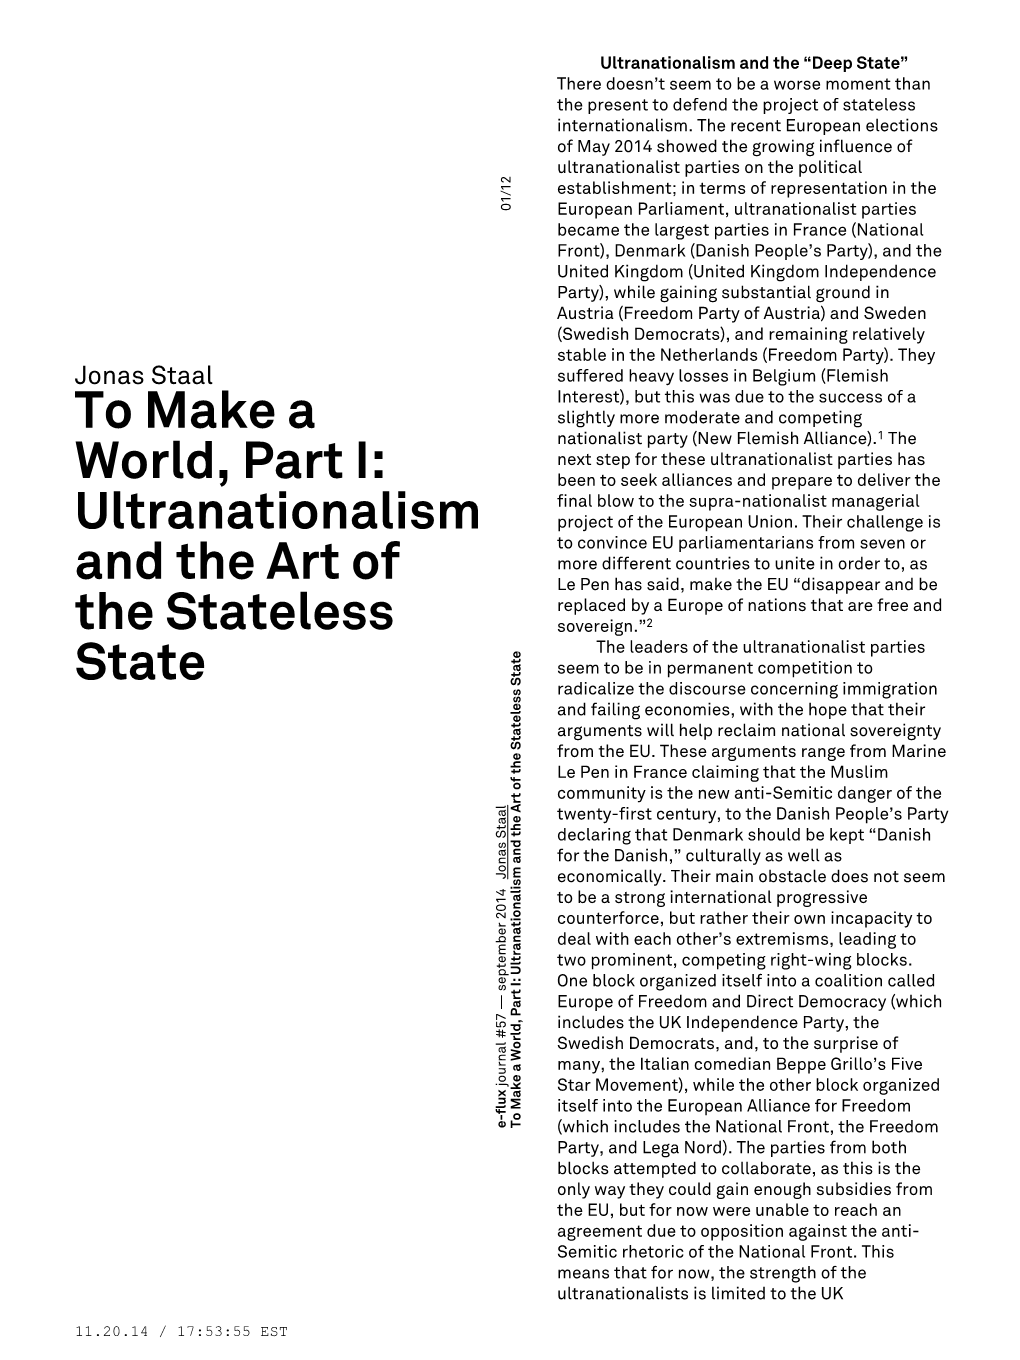 Ultranationalism and the Art of the Stateless State